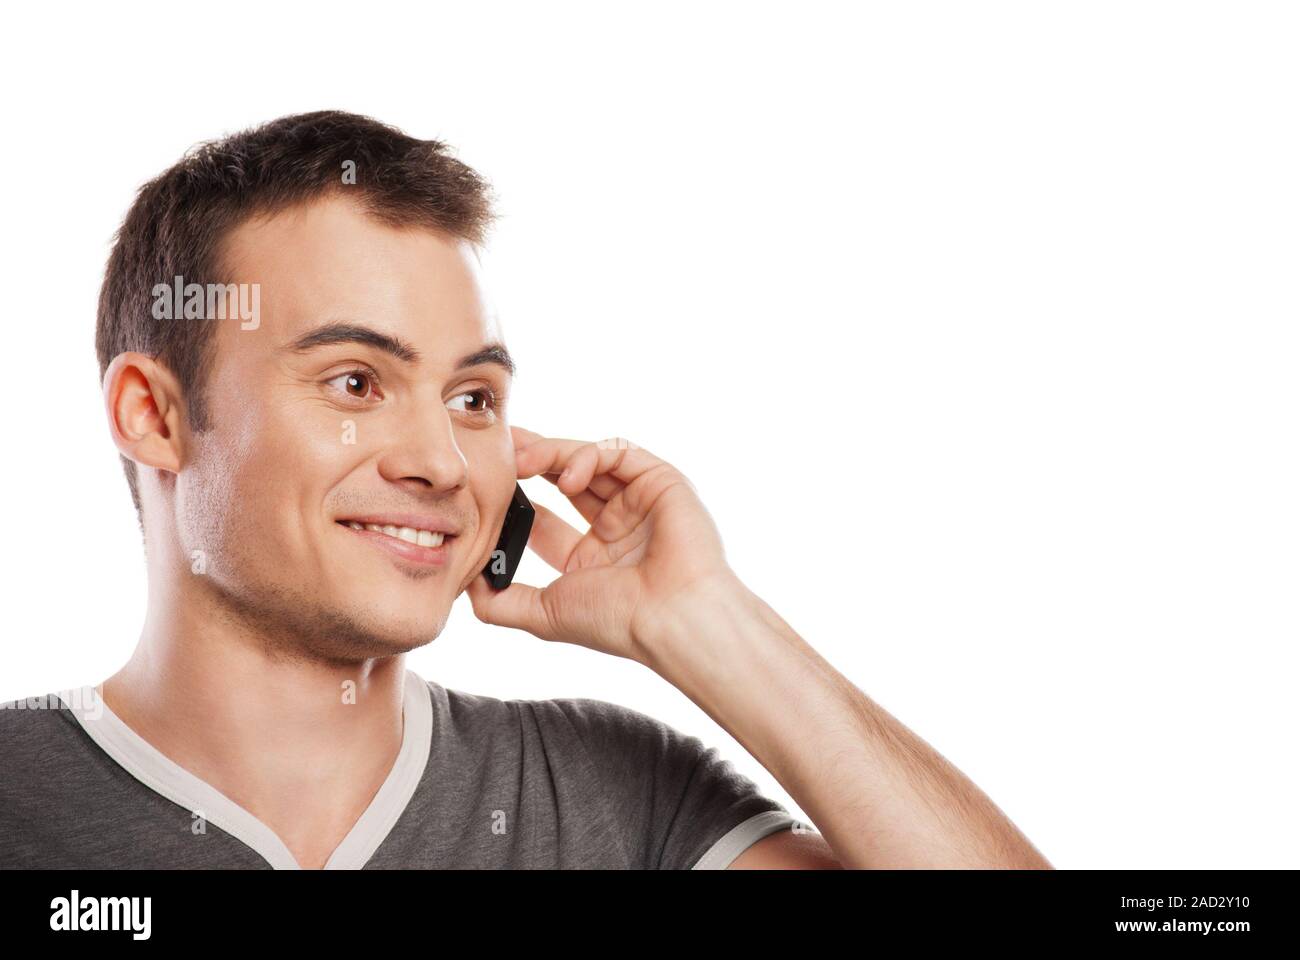 Happy man answering the phone isolated Stock Photo